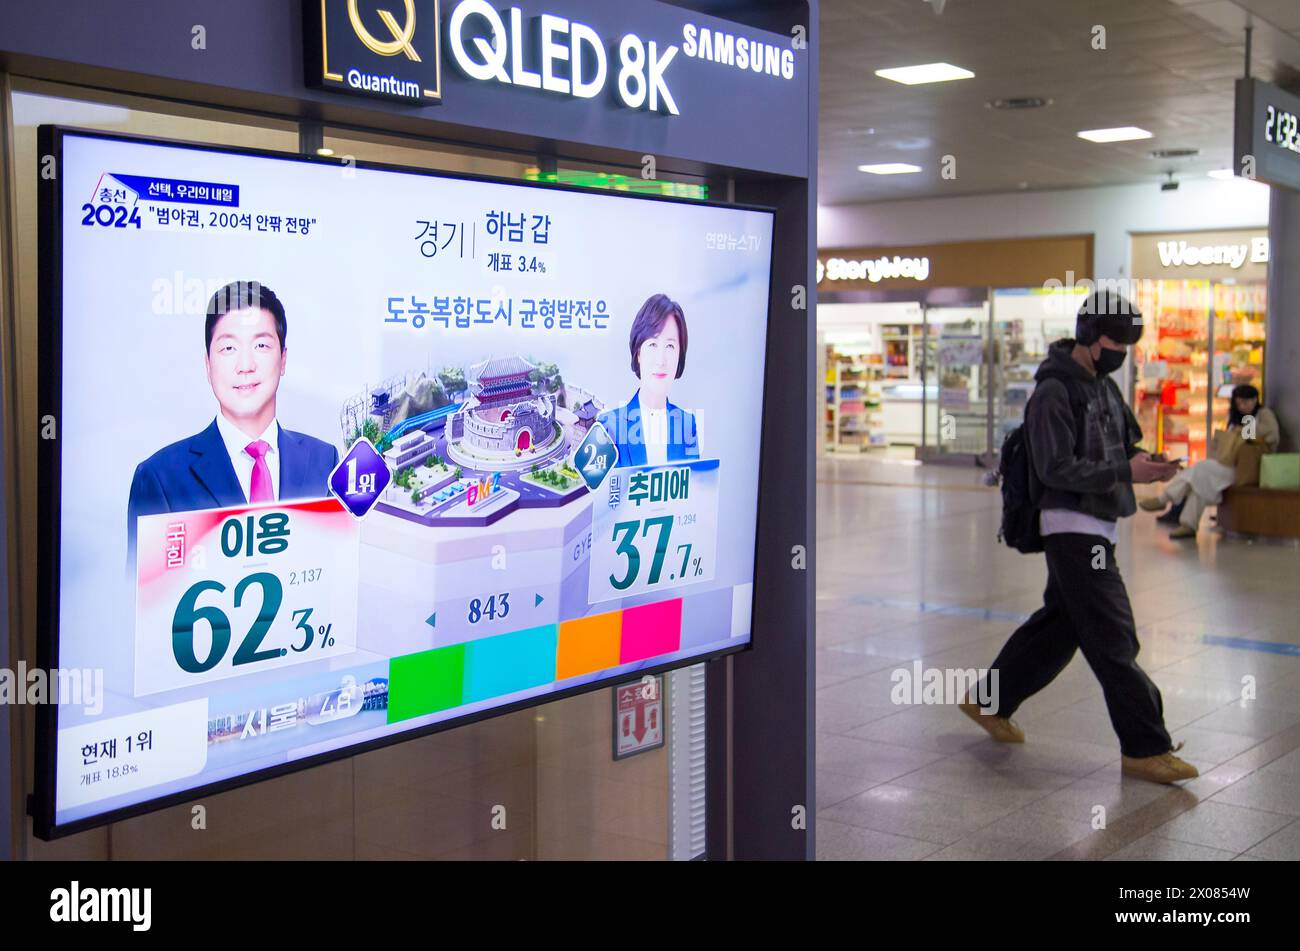 The ballot-counting of the parliamentary election, Apr 10, 2024 : A TV screen at a train station shows a live news report on the ballot-counting of the parliamentary election in Seoul, South Korea. South Korea's main opposition Democratic Party was leading the ruling People Power Party in parliamentary elections as ballot counting was under way after exit polls forecasted a landslide victory for the opposition parties, local media reported. Credit: Lee Jae-Won/AFLO/Alamy Live News Stock Photo